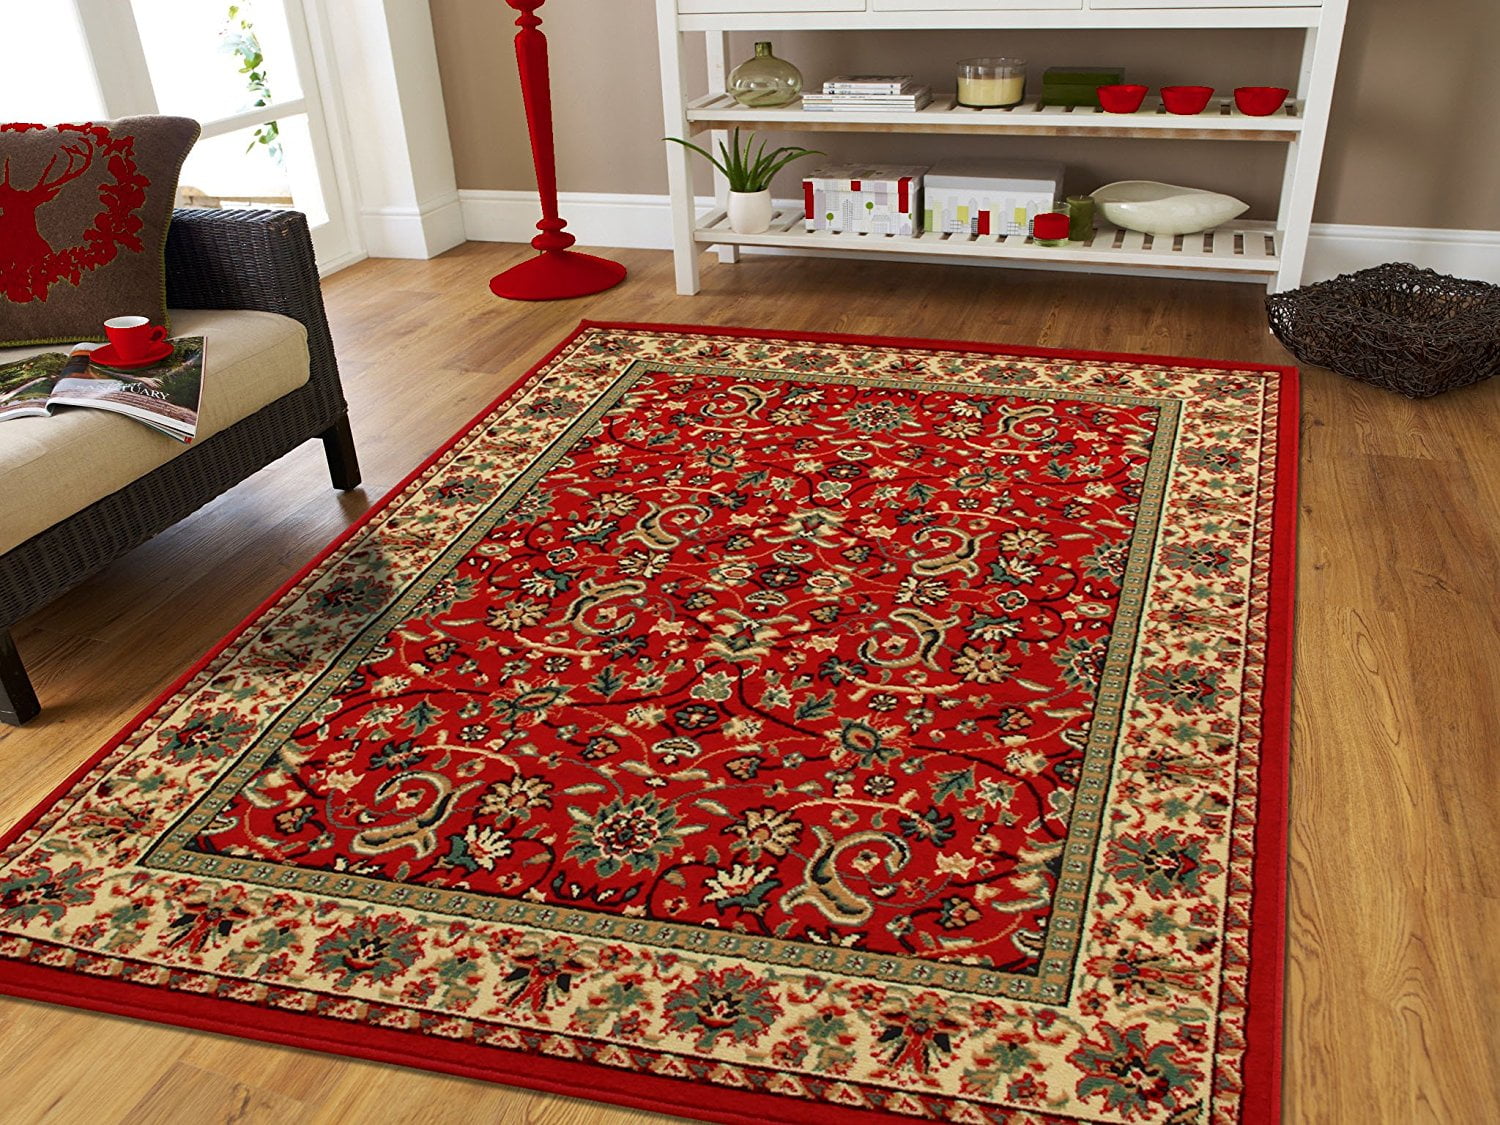 Red Persian Area Rugs For Living Room, Large Area Rugs